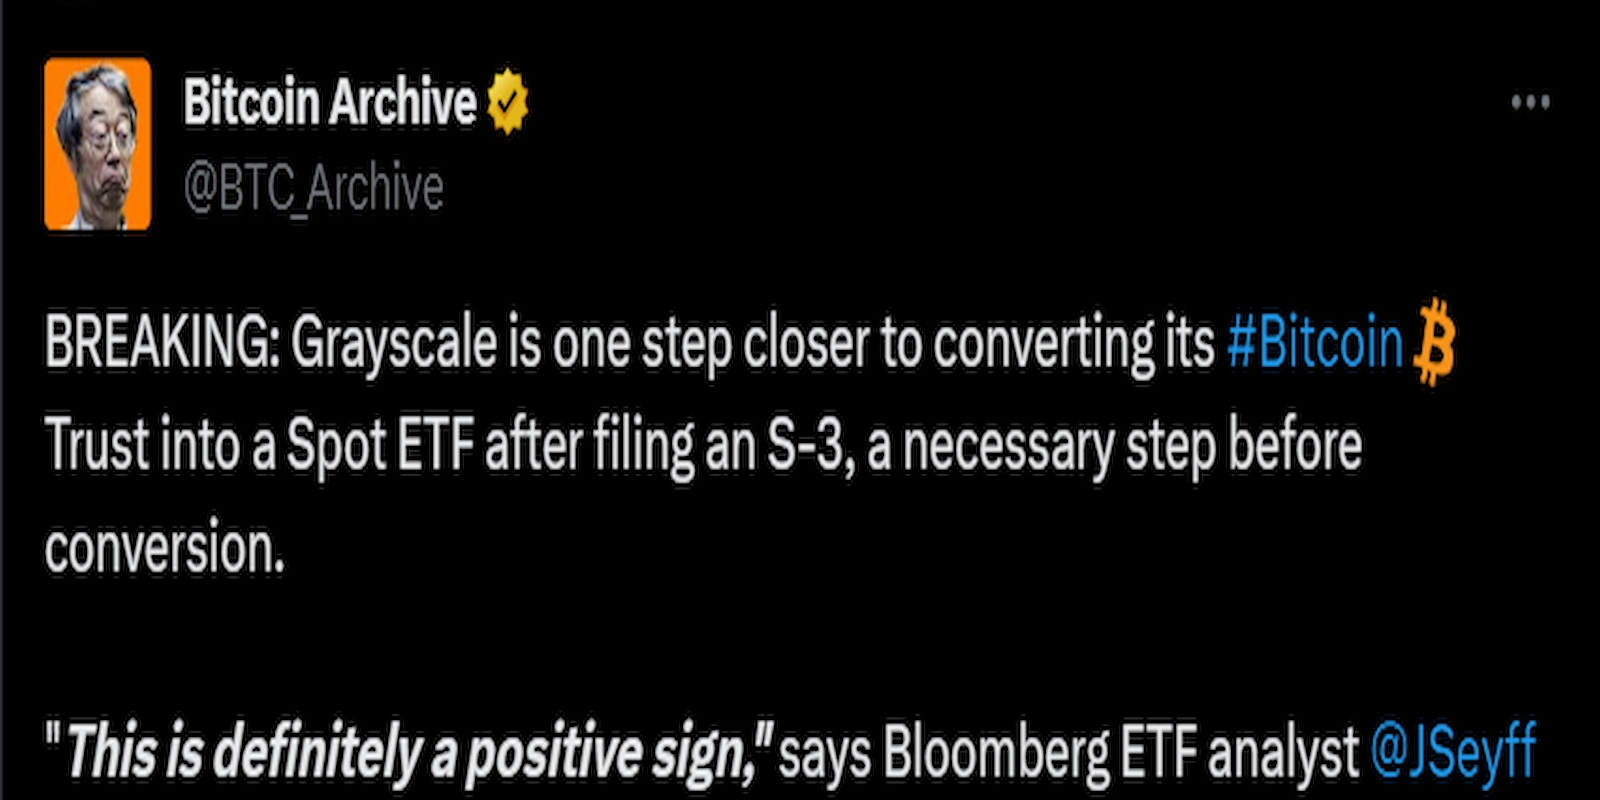 Speculations of a BTC spot ETF approval are running wild.